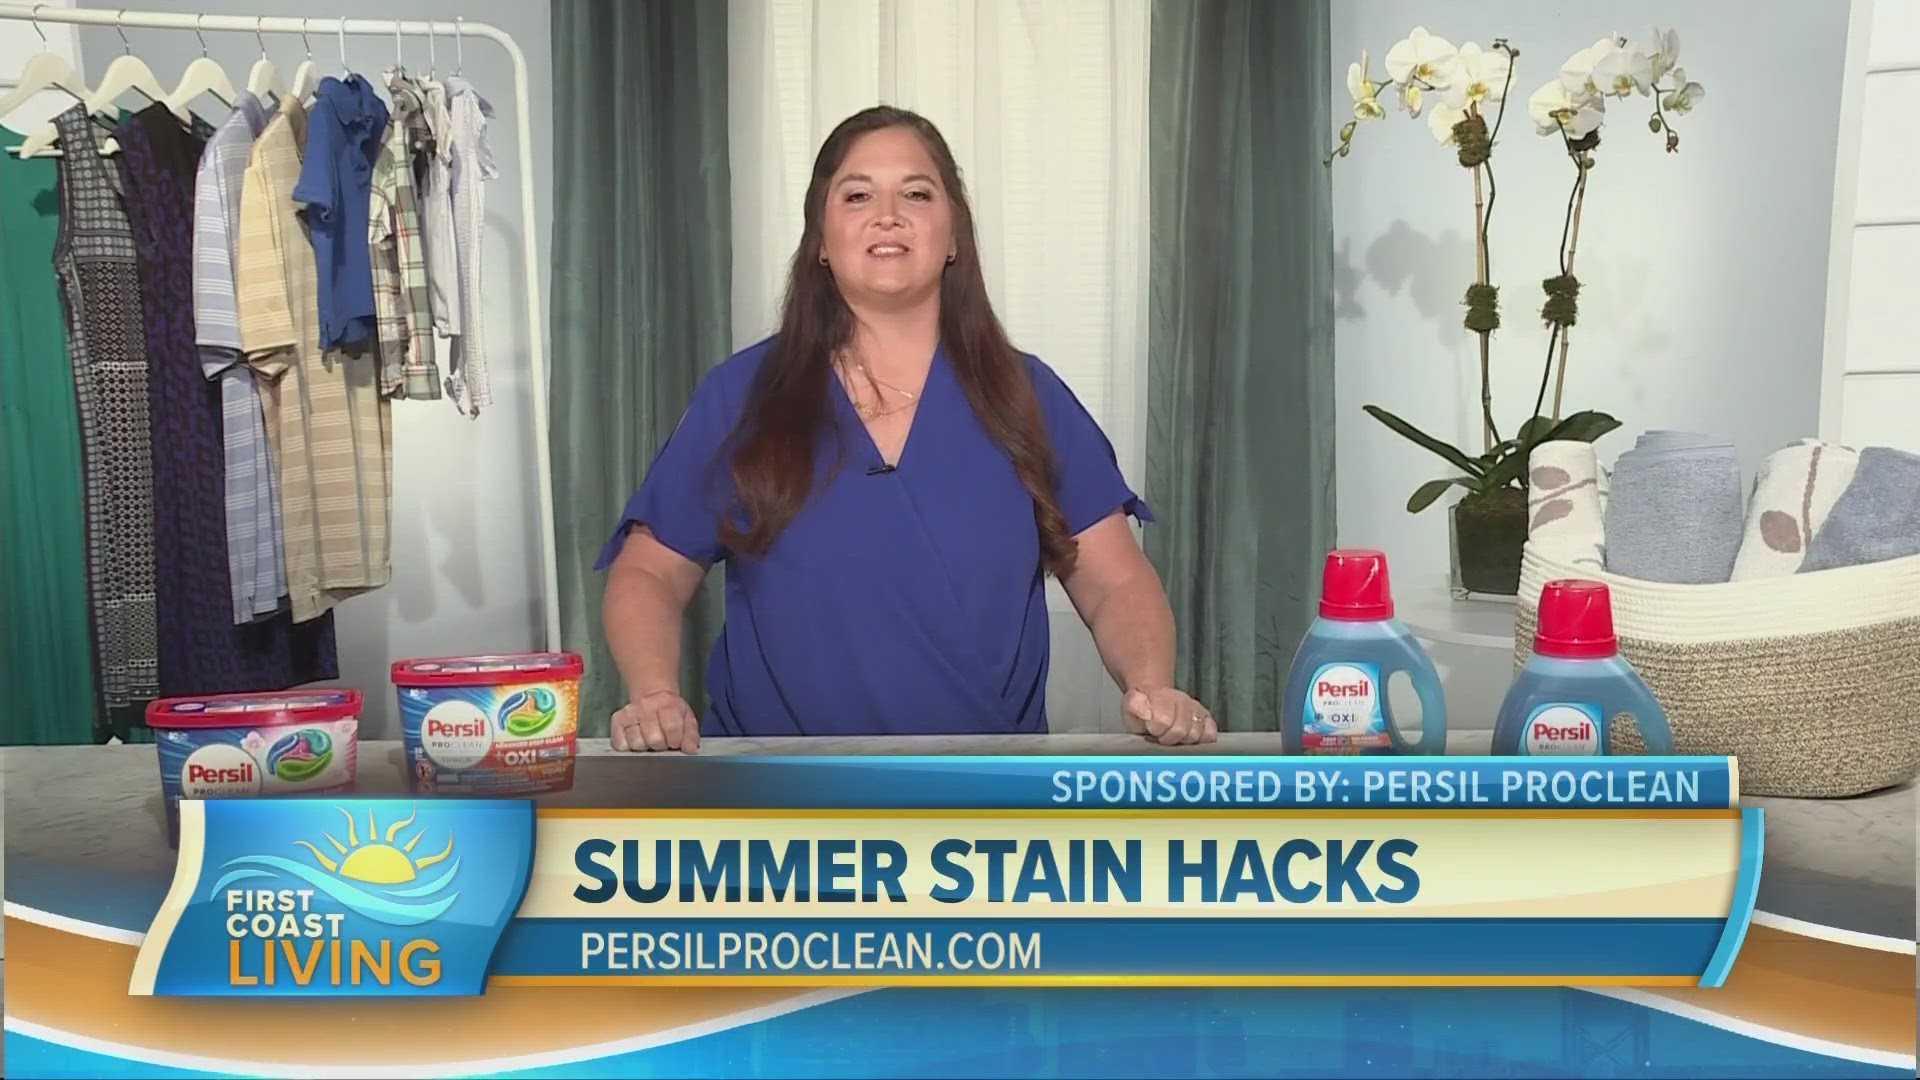 Consumer product testing and stain expert at Henkel, Wendy Saladyga shares advice on removing summertime stains and odors.